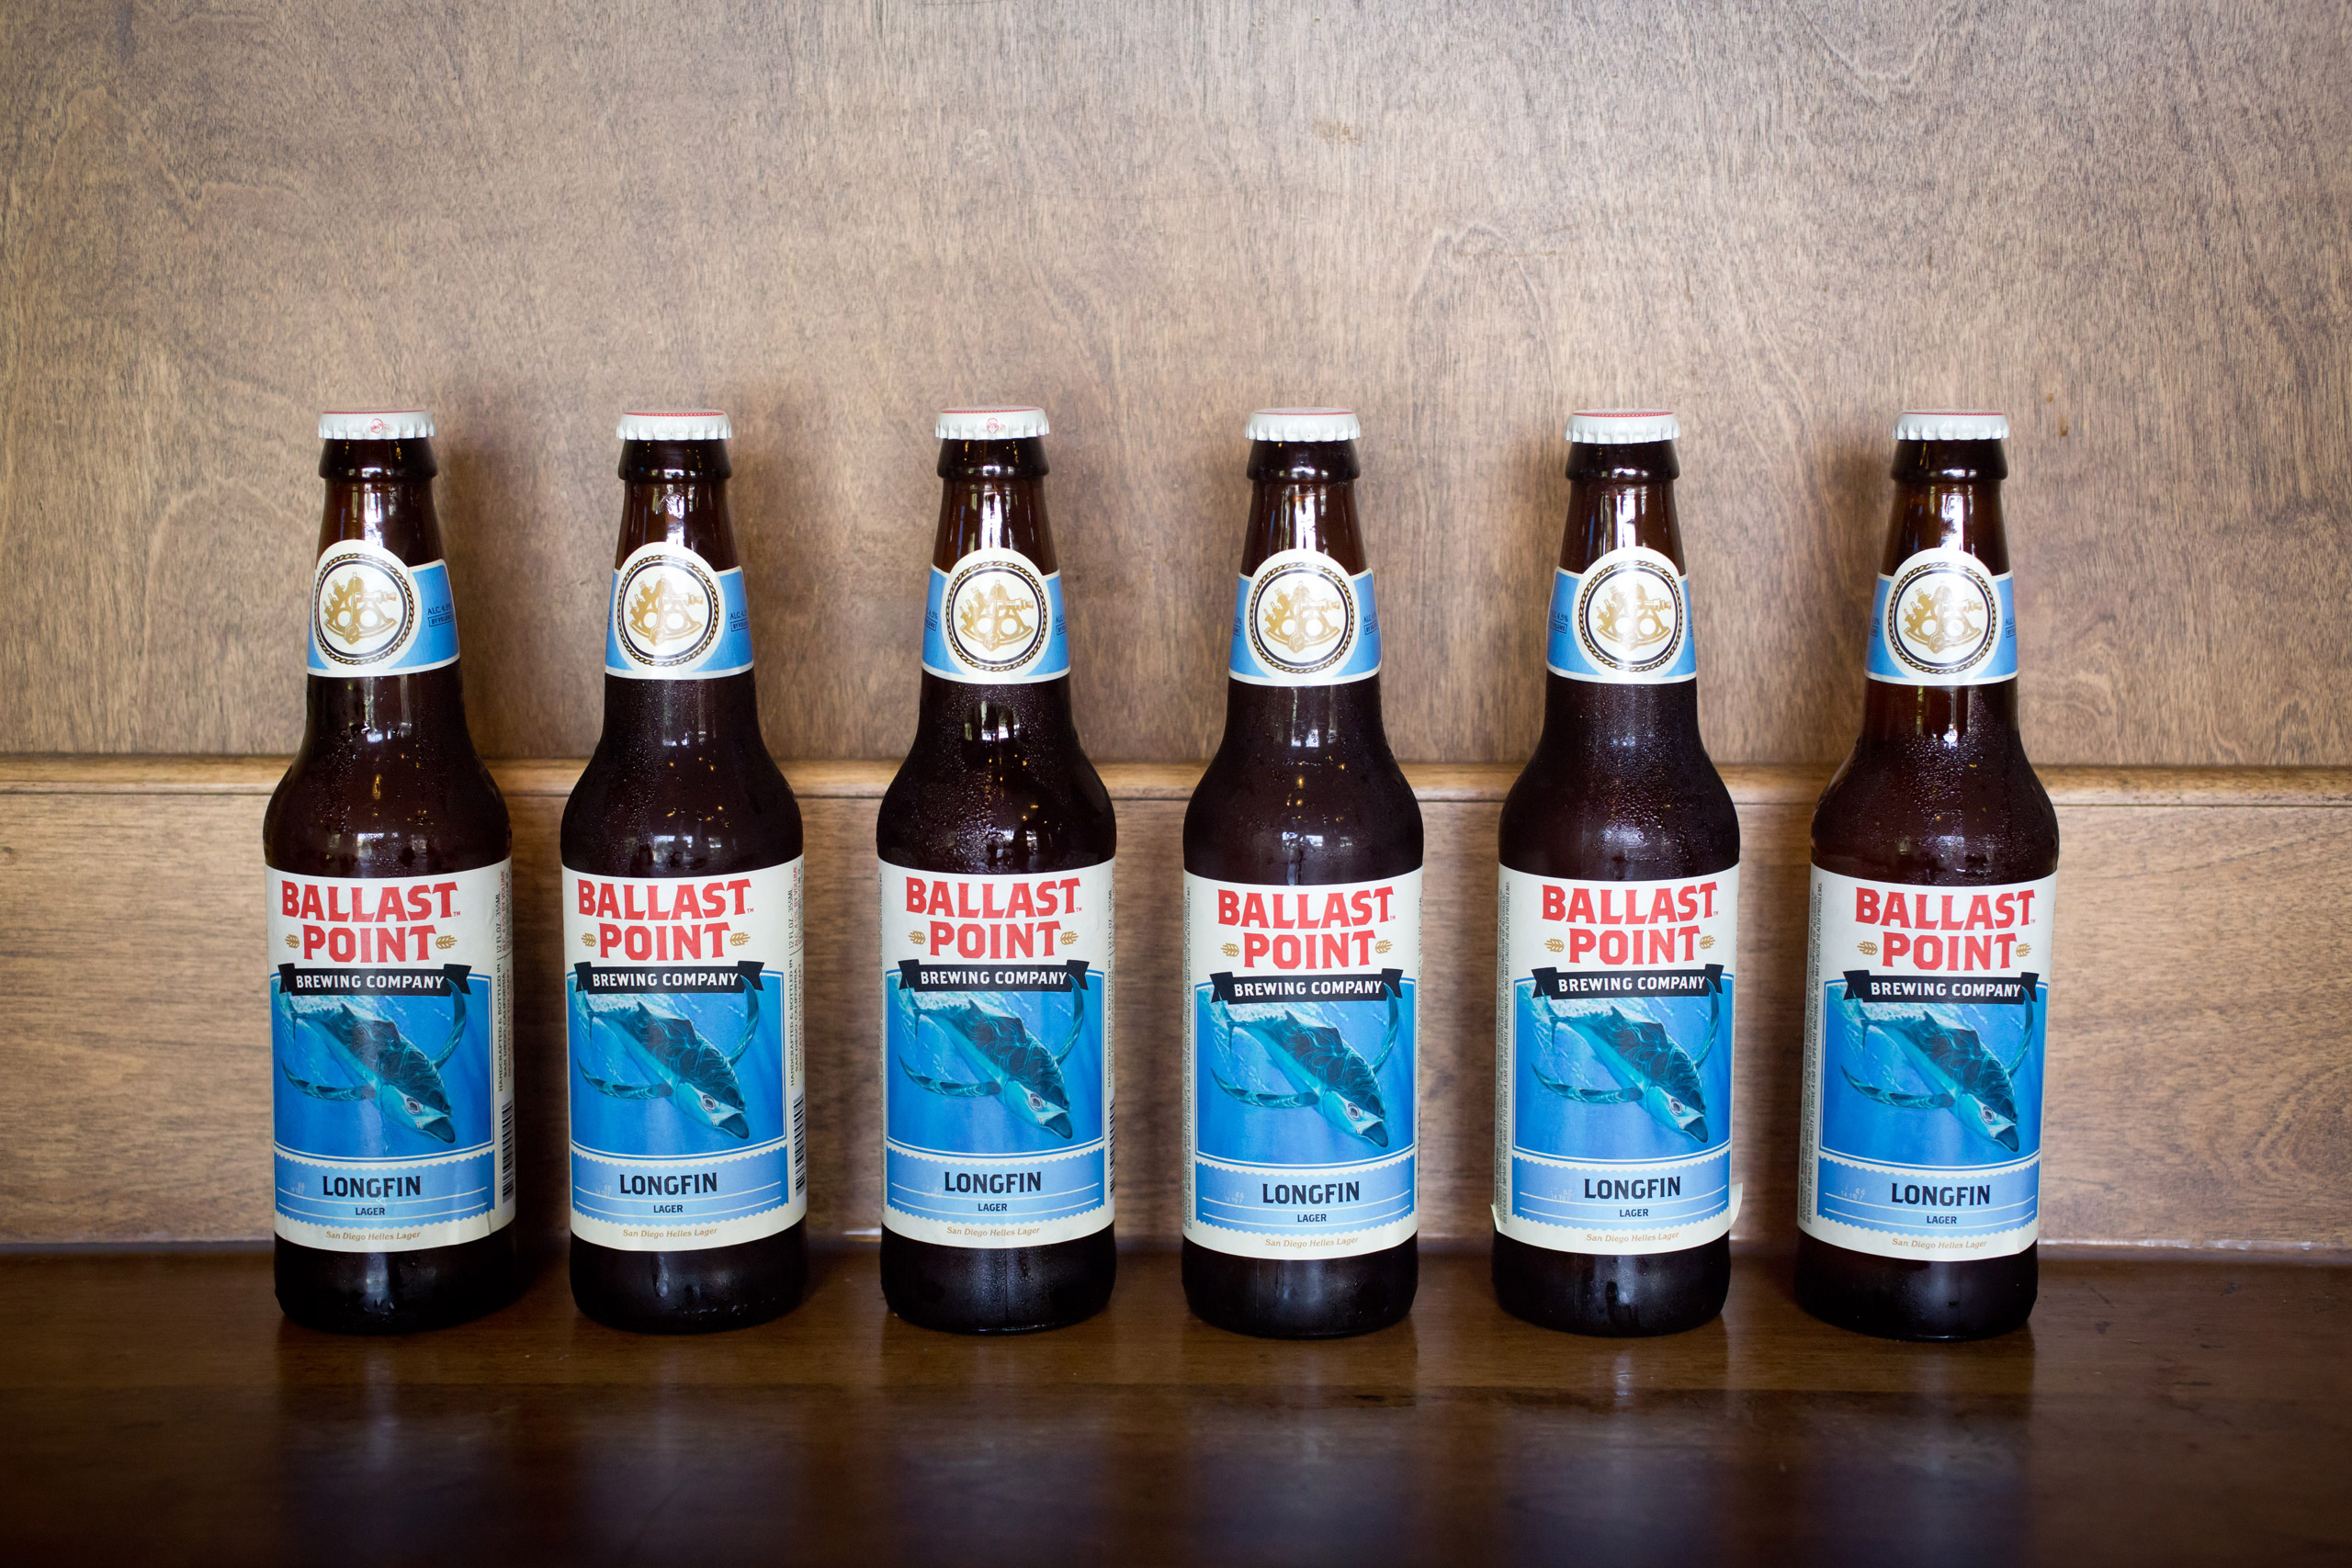 Bottles with Longfin Lager, Helles Lager in the tasting room of the Ballast Point Brewing Company, a micro brewery in San Diego, on August 25, 2014. (Frank Duenzl—dpa/Corbis)